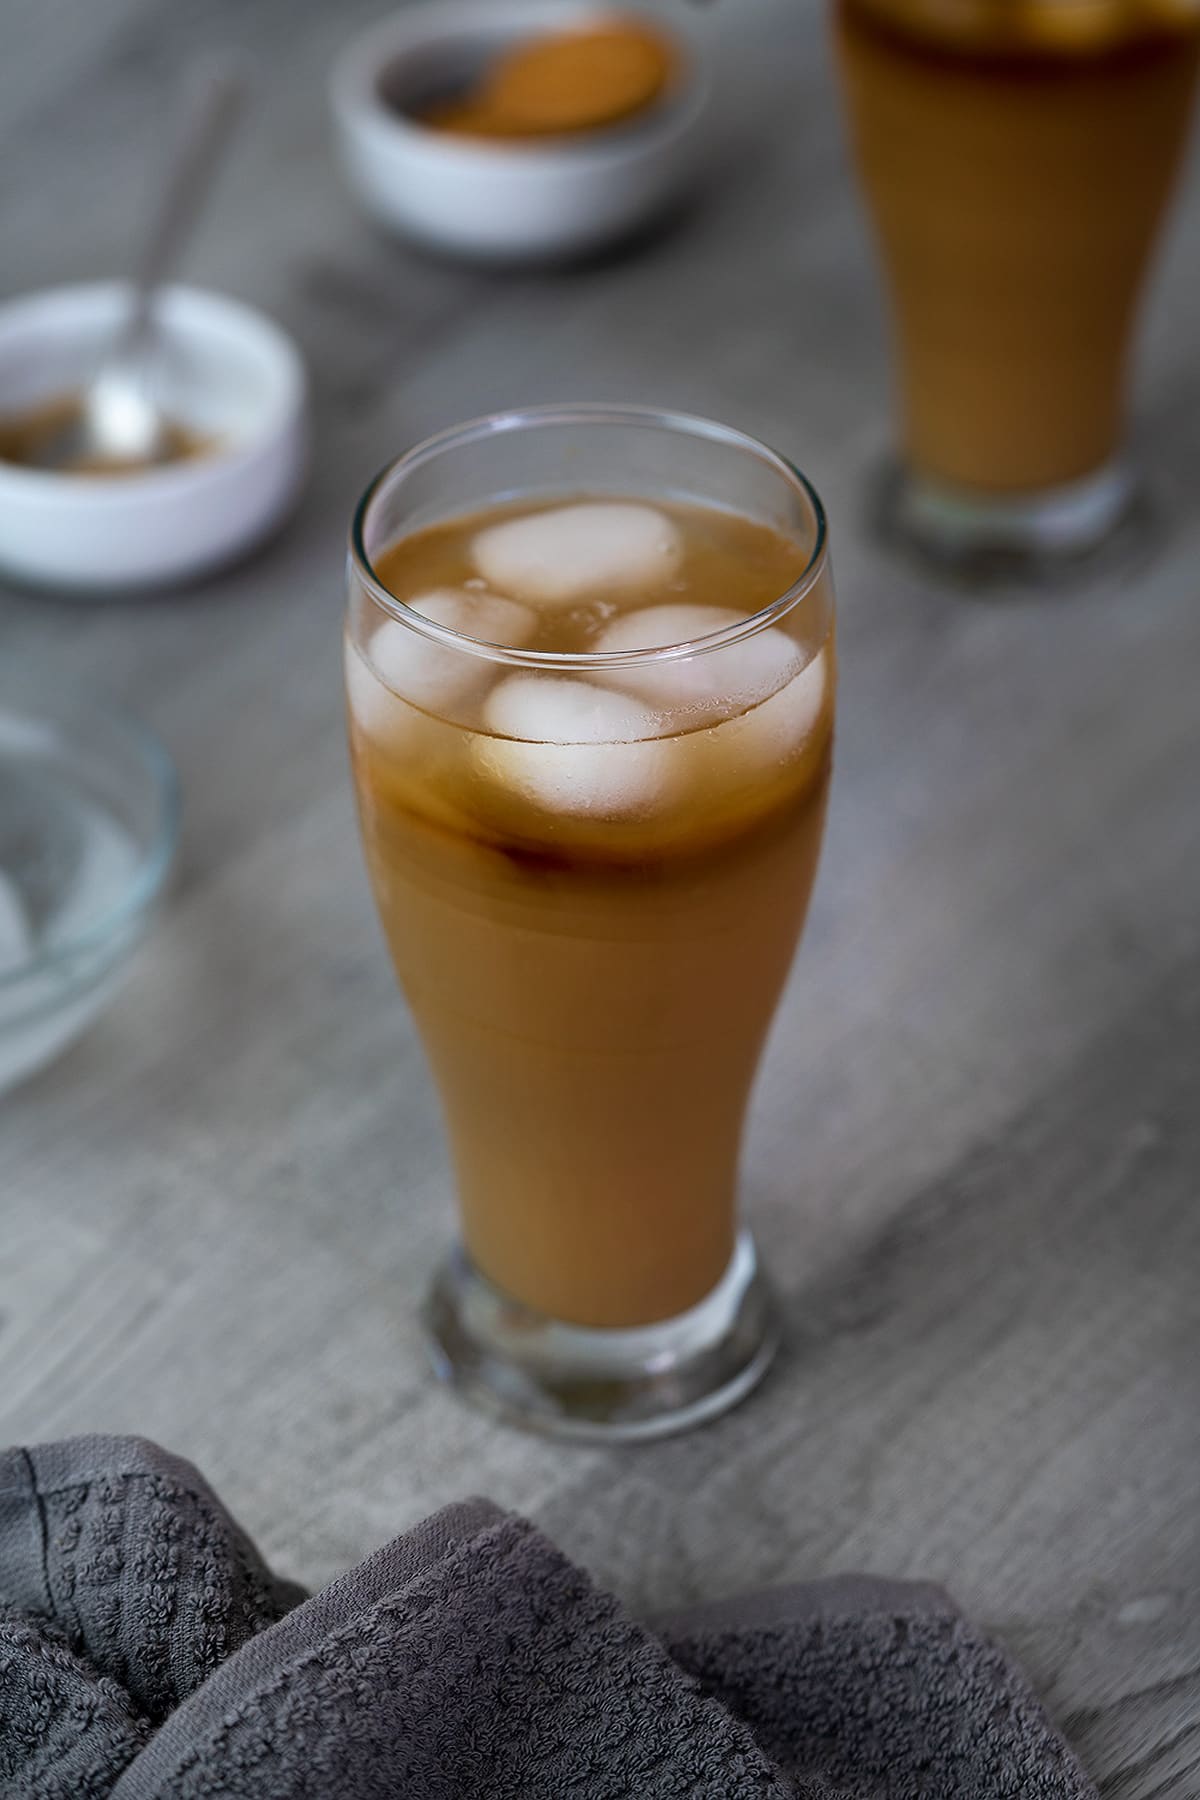 Iced coffee served in a glass with brown sugar and ice cubes nearby.